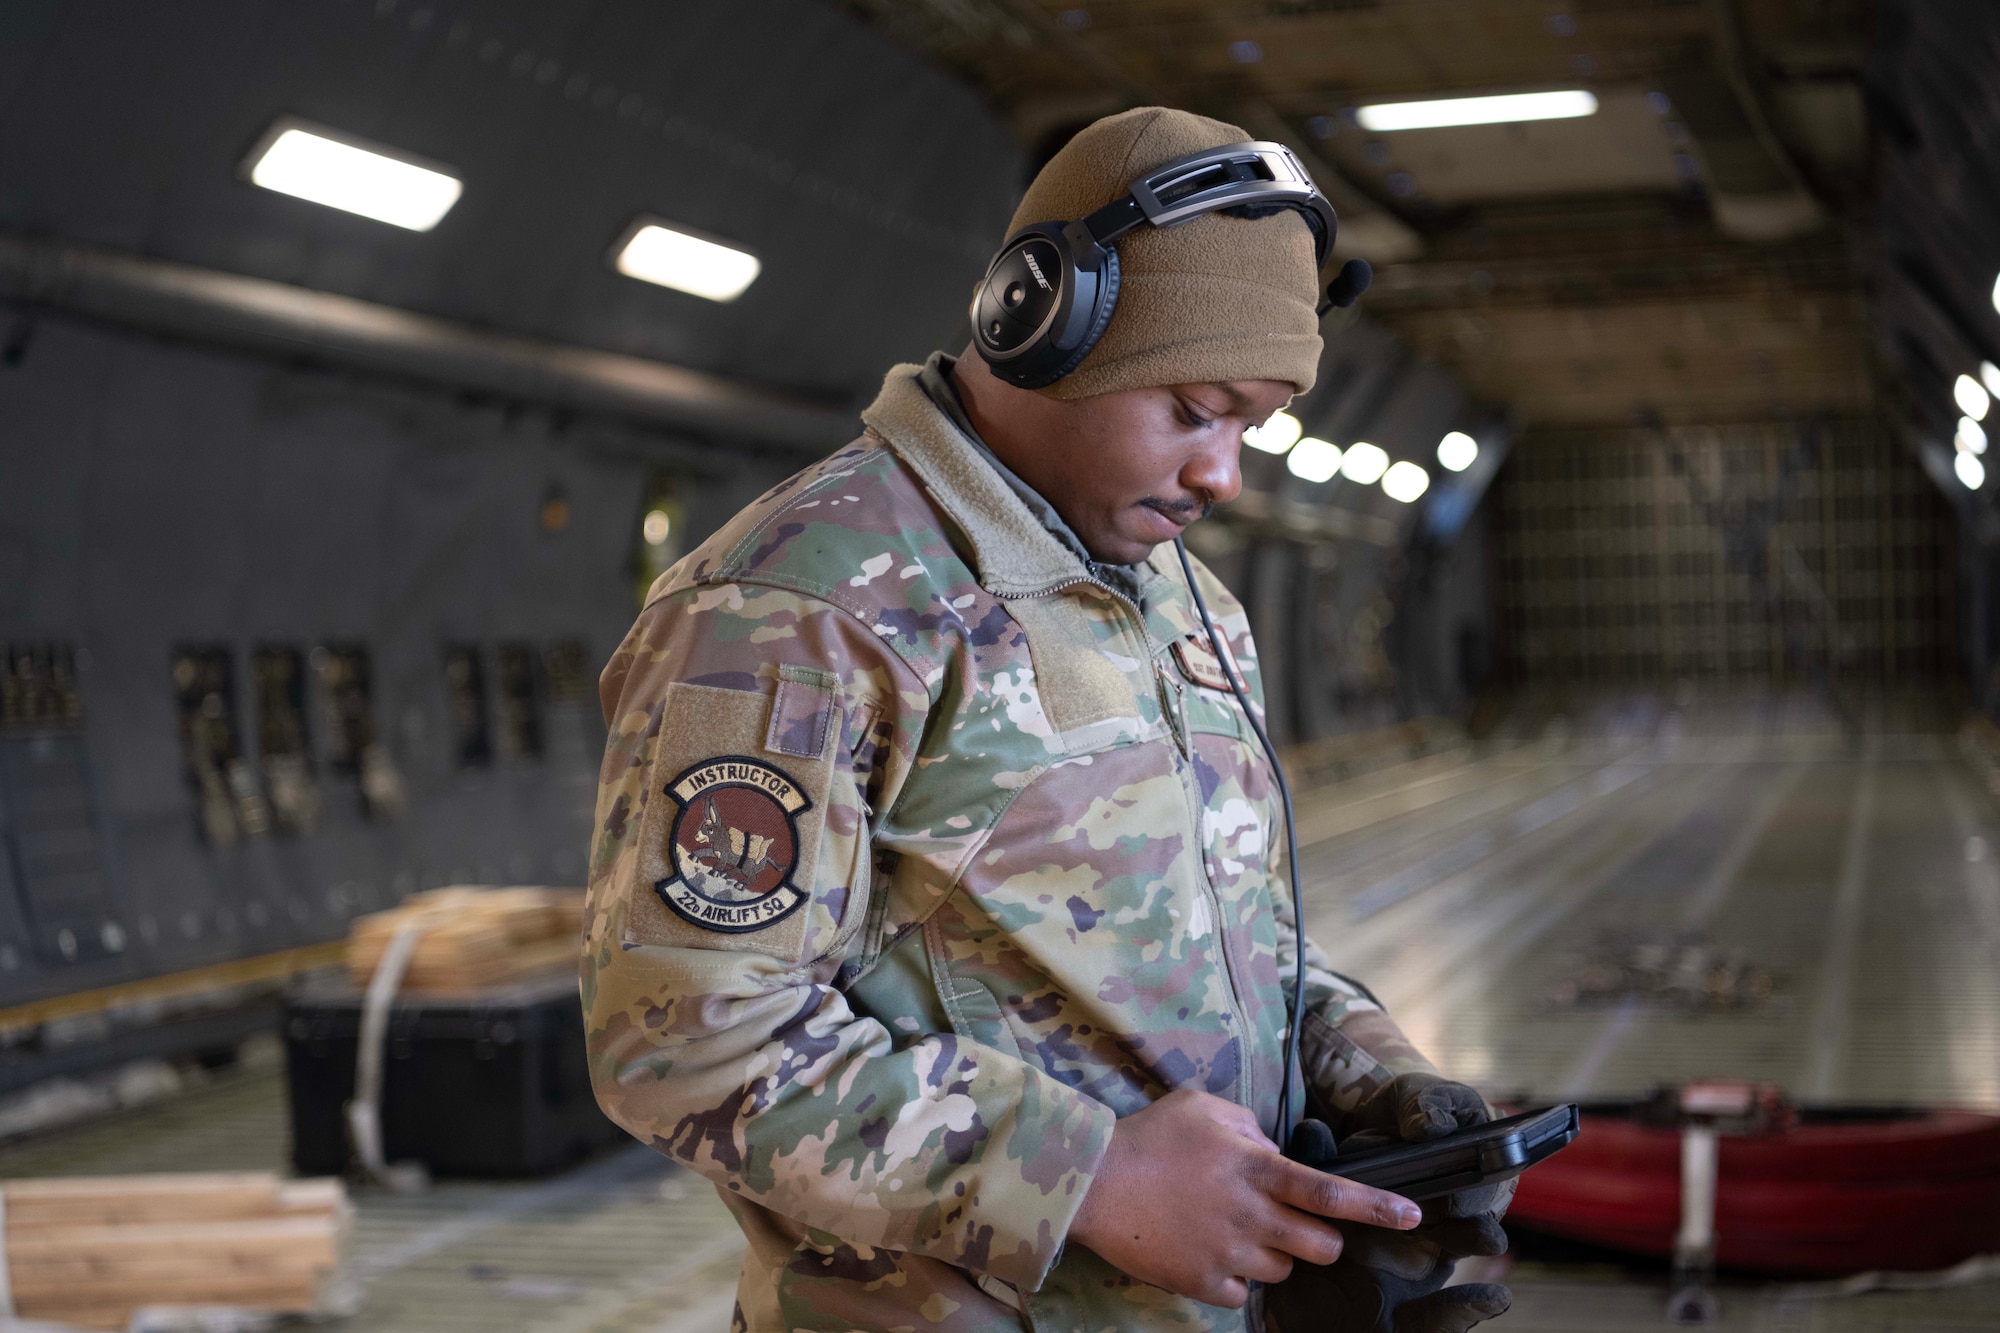 An Airman looks at an electronic device inside the cargo bay of a military aircraft